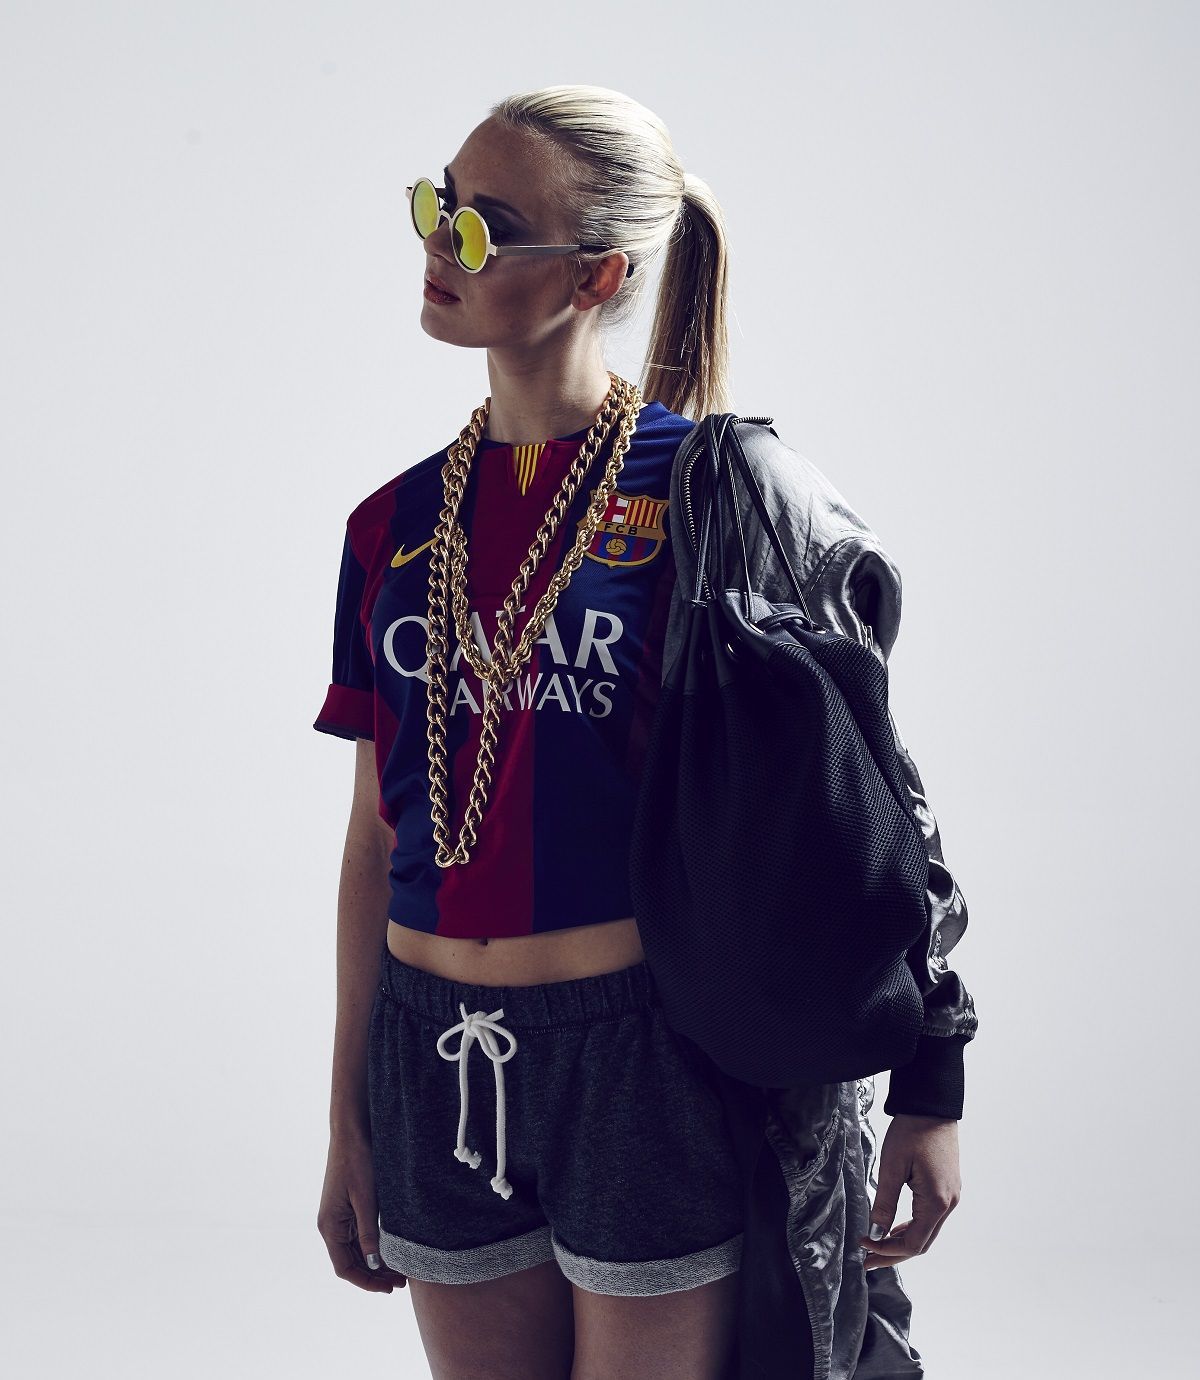 Barcelona girl ready to go. Fully equipped it is time to go!. Soccer game outfits, Soccer outfit, Football shirt designs